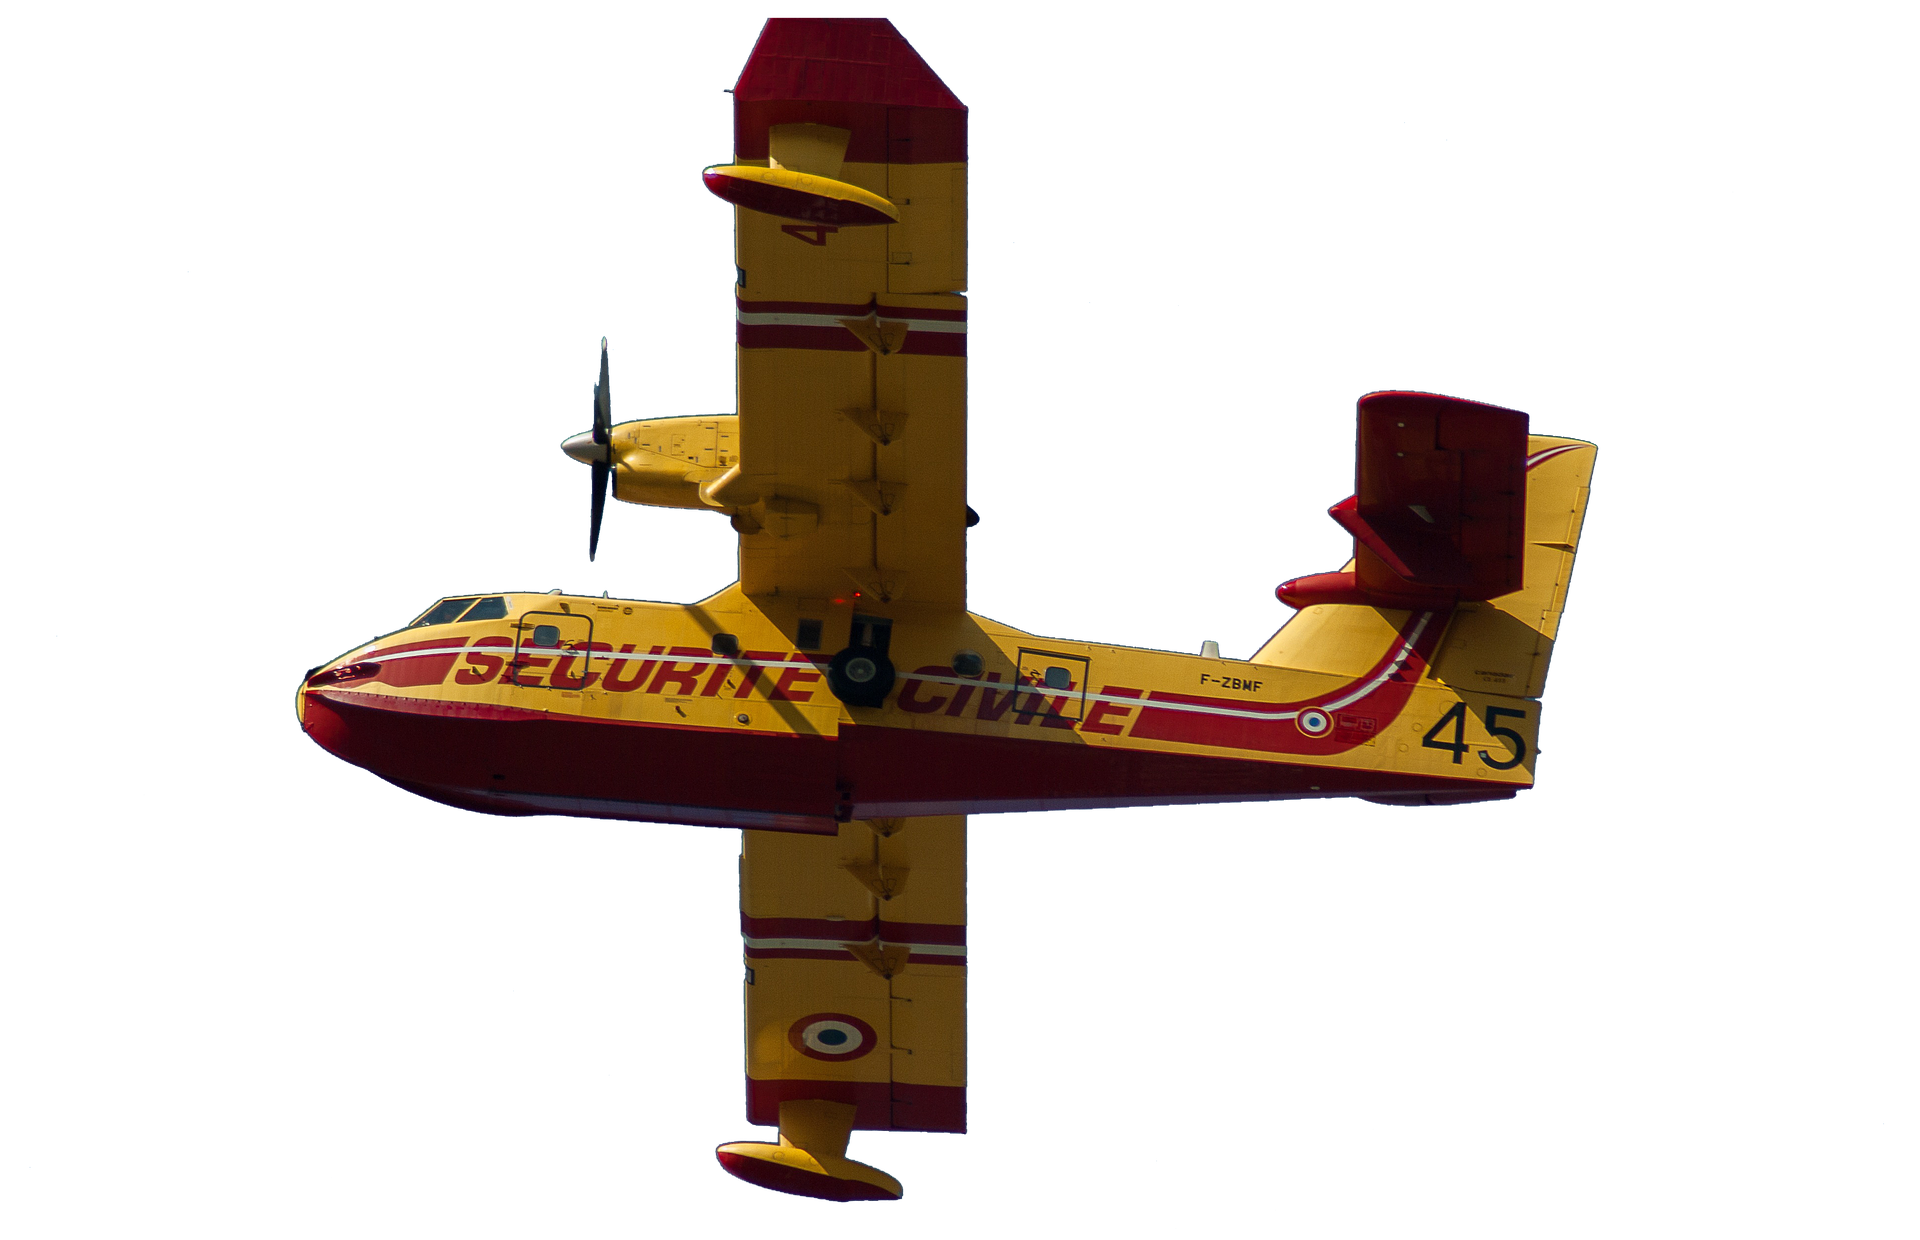 A Yellow And Red Airplane